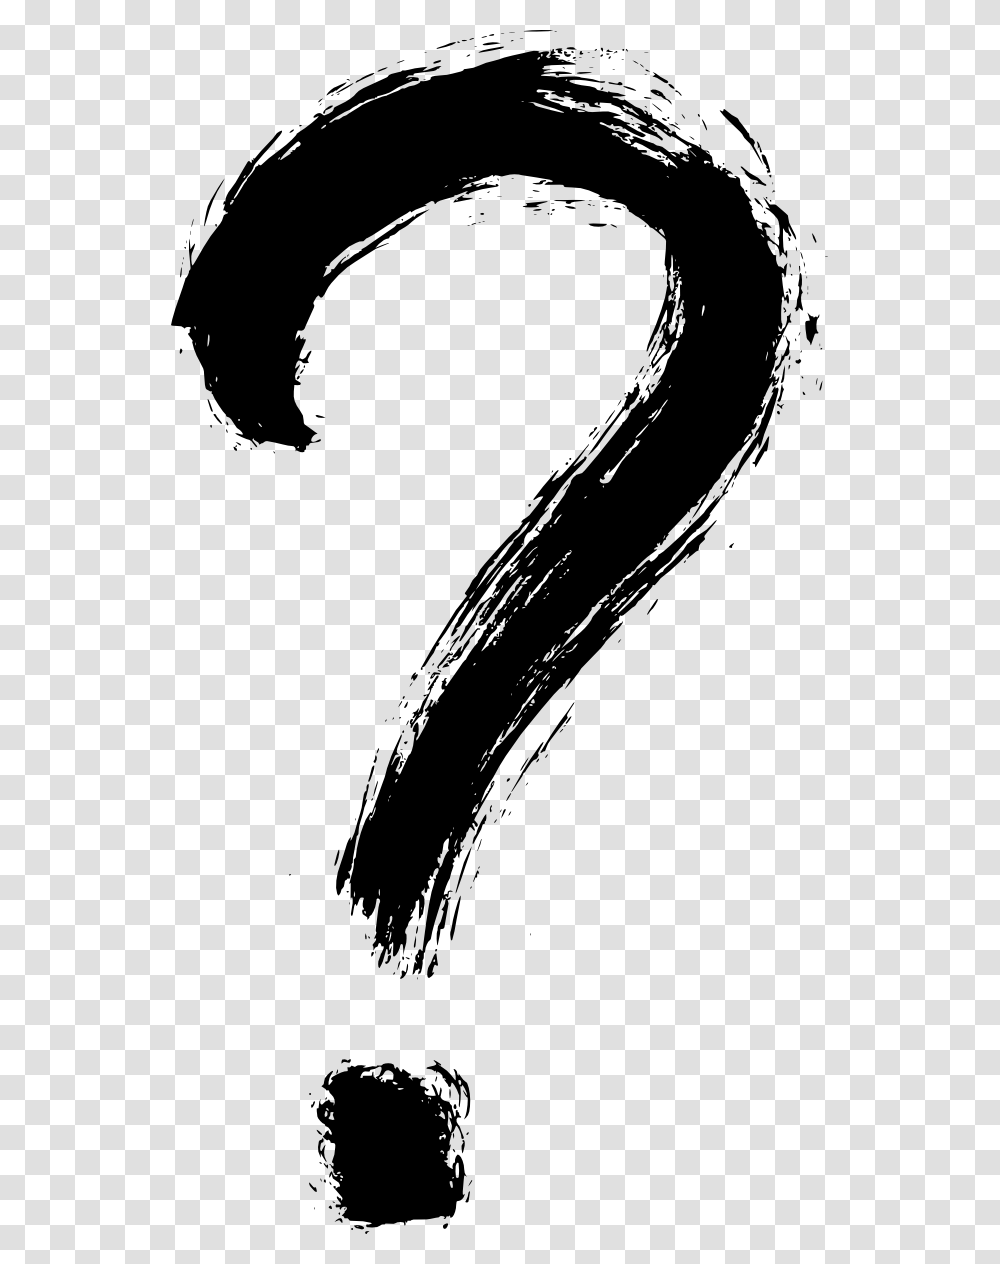 Background Question Mark, Weapon, Weaponry, Knife, Blade Transparent Png